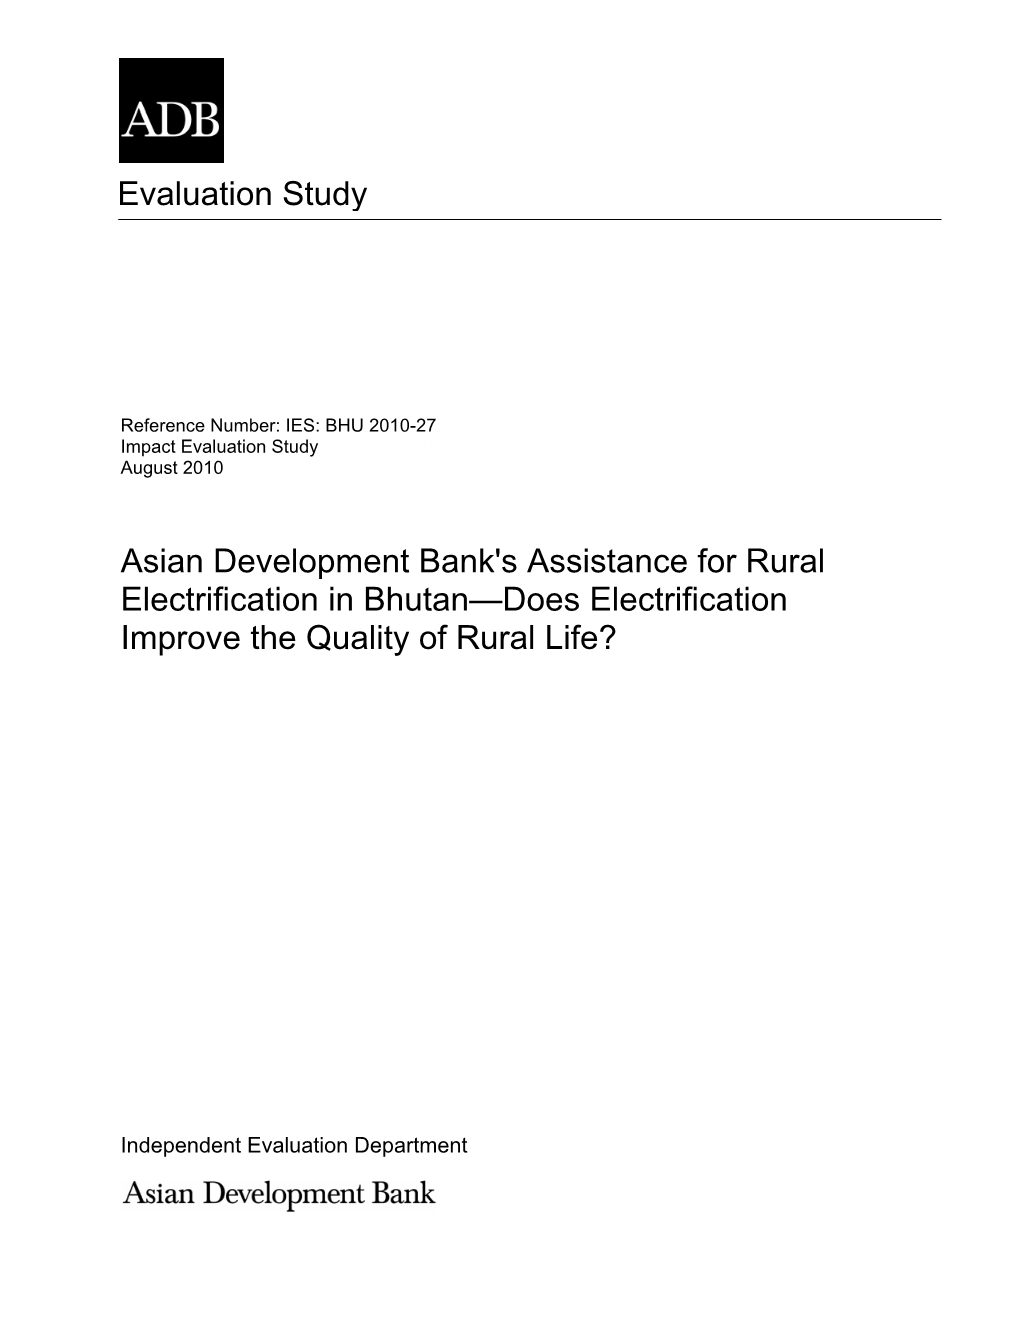 Asian Development Bank's Assistance for Rural Electrification in Bhutan—Does Electrification Improve the Quality of Rural Life?